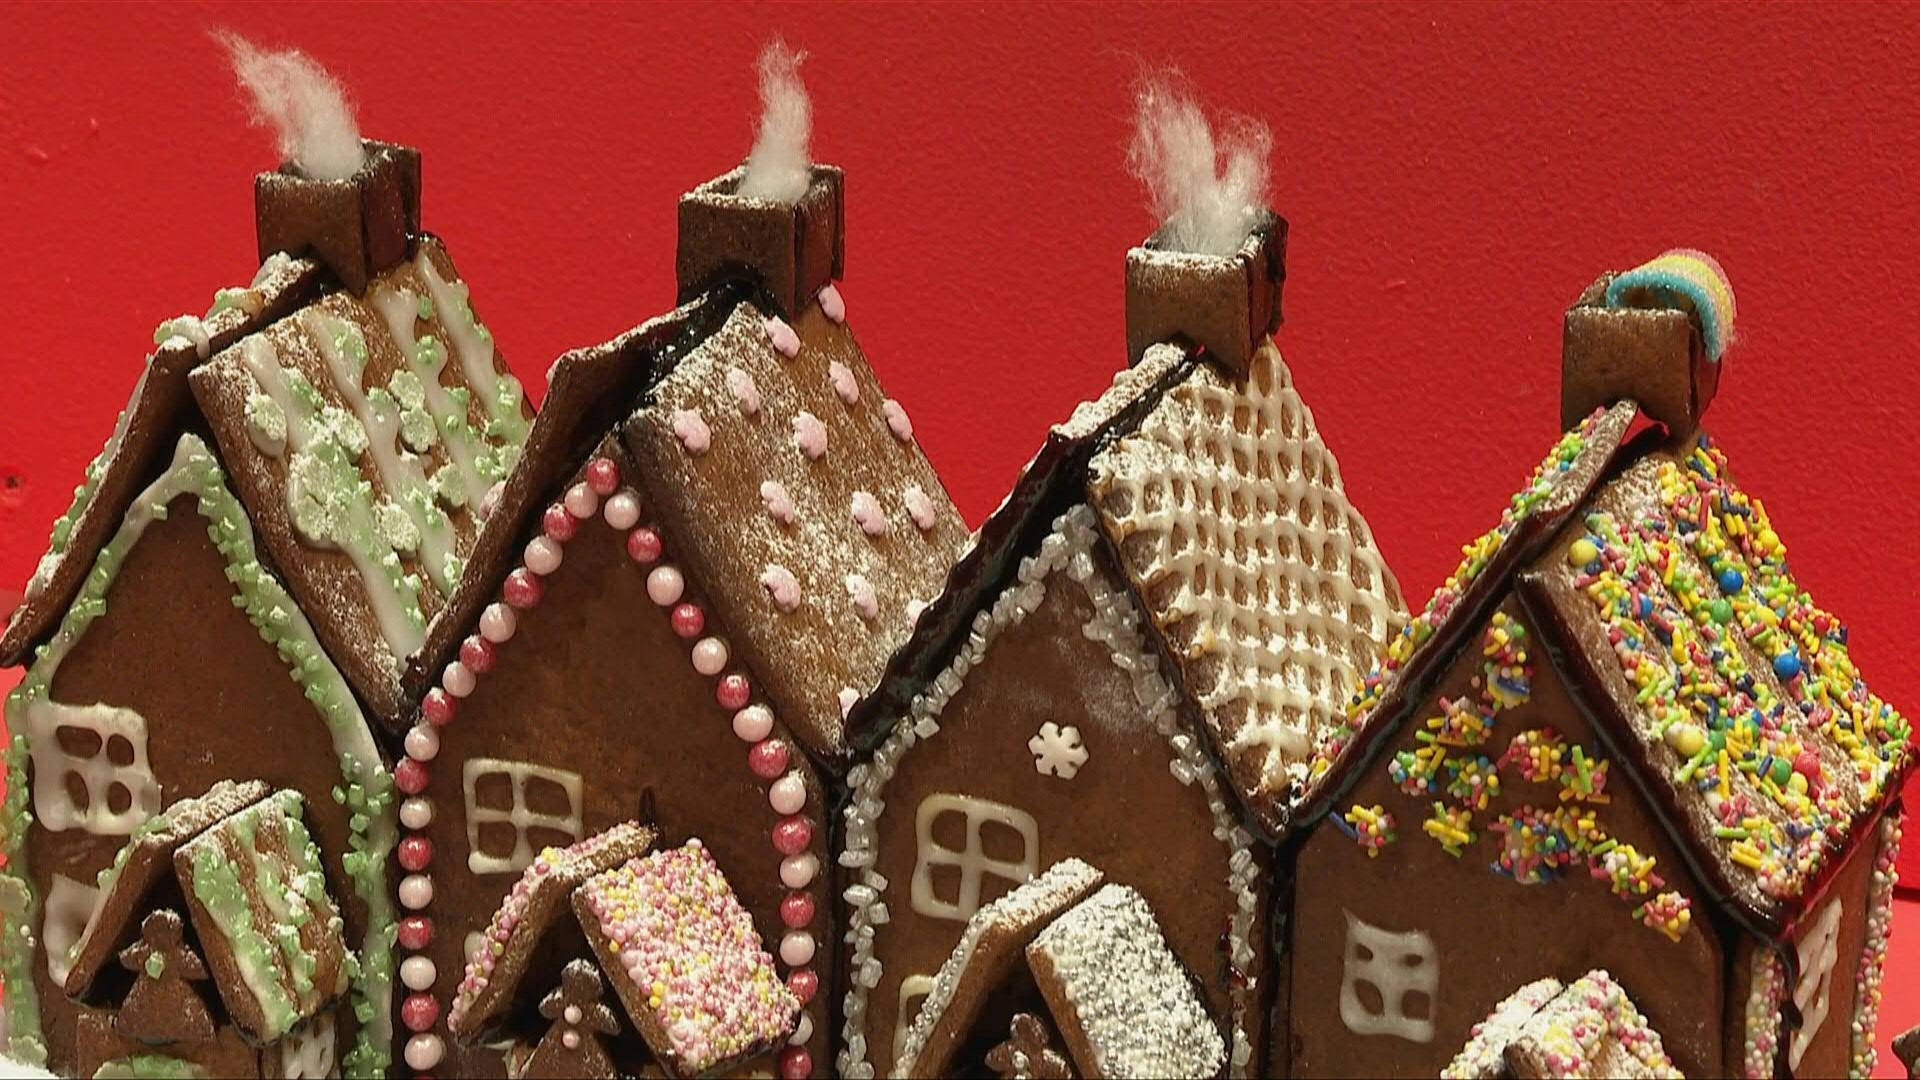 Exquisite Edible Gingerbread House Background